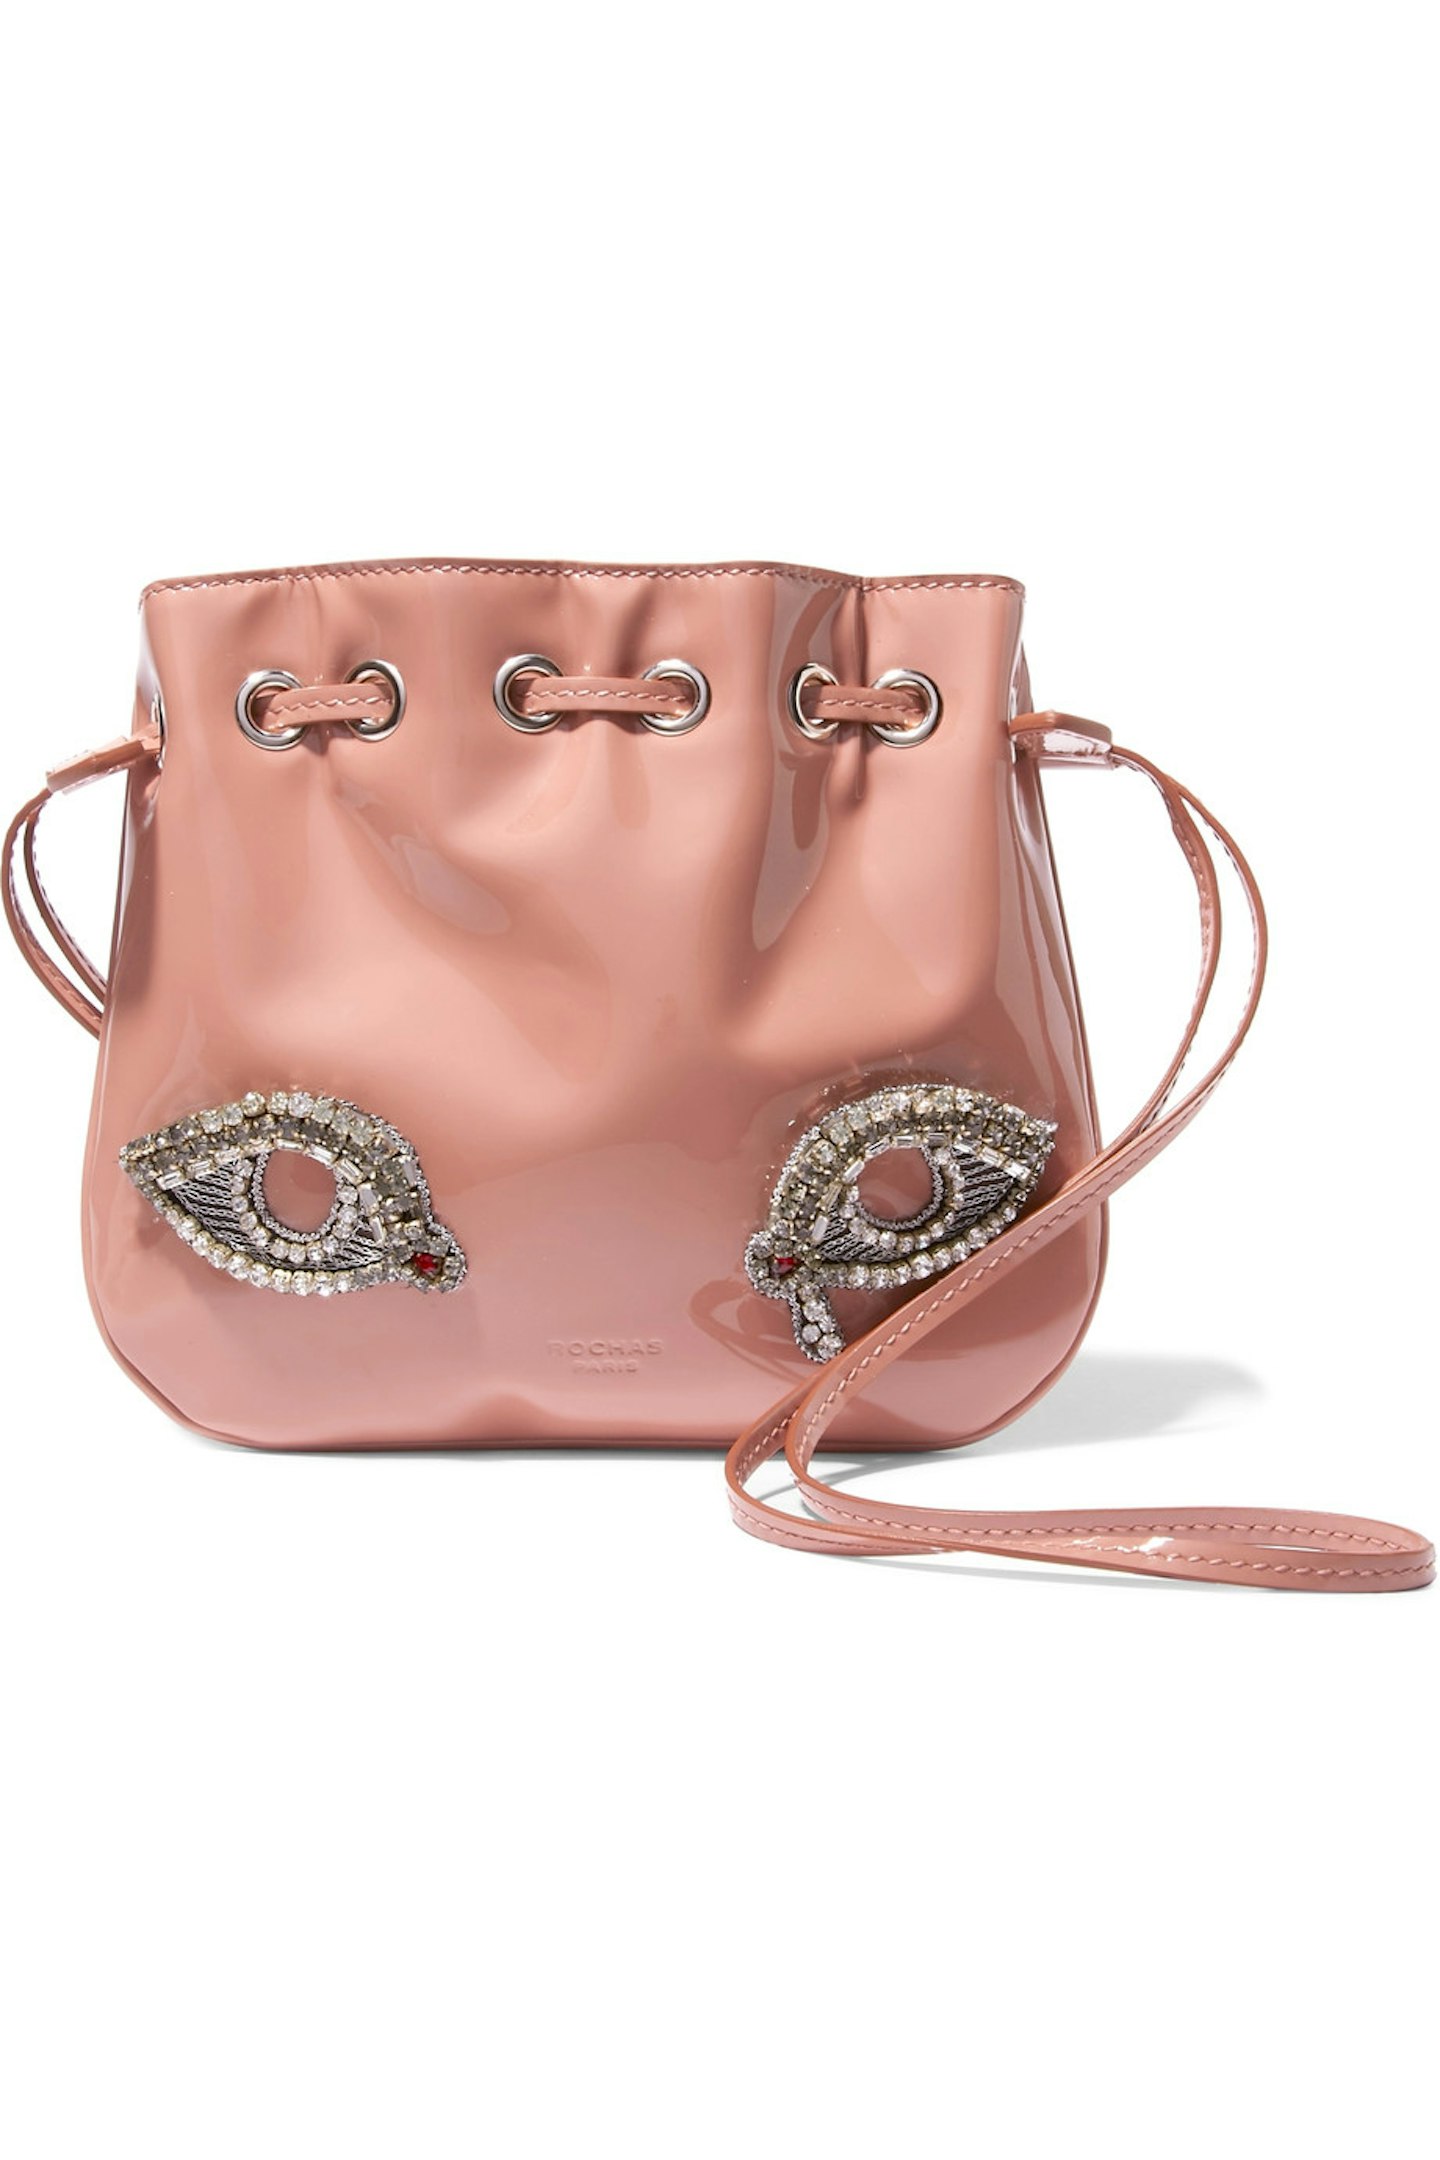 the-outnet-sale-pink-satin-bag-rochas